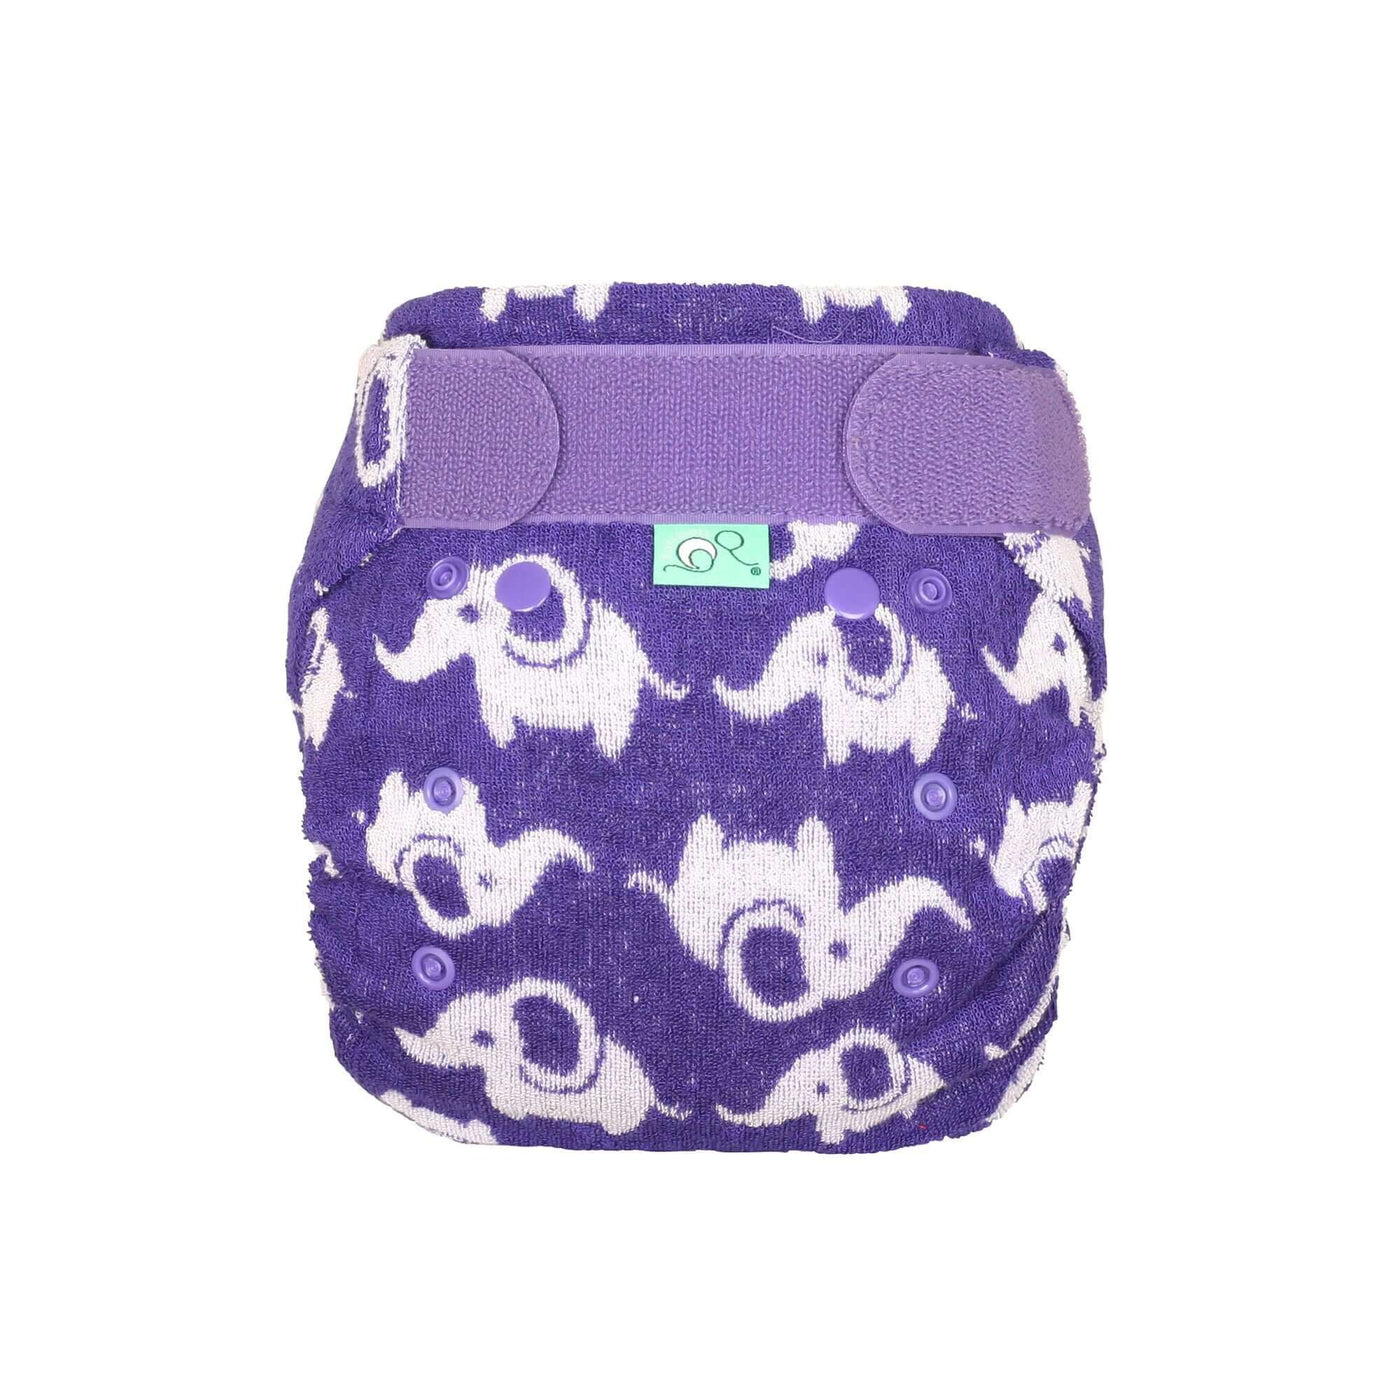 Tots Bots Bamboozle Stretch Nappy Colour: Catkin Size: Size 1 (6-18lbs) reusable nappies Earthlets